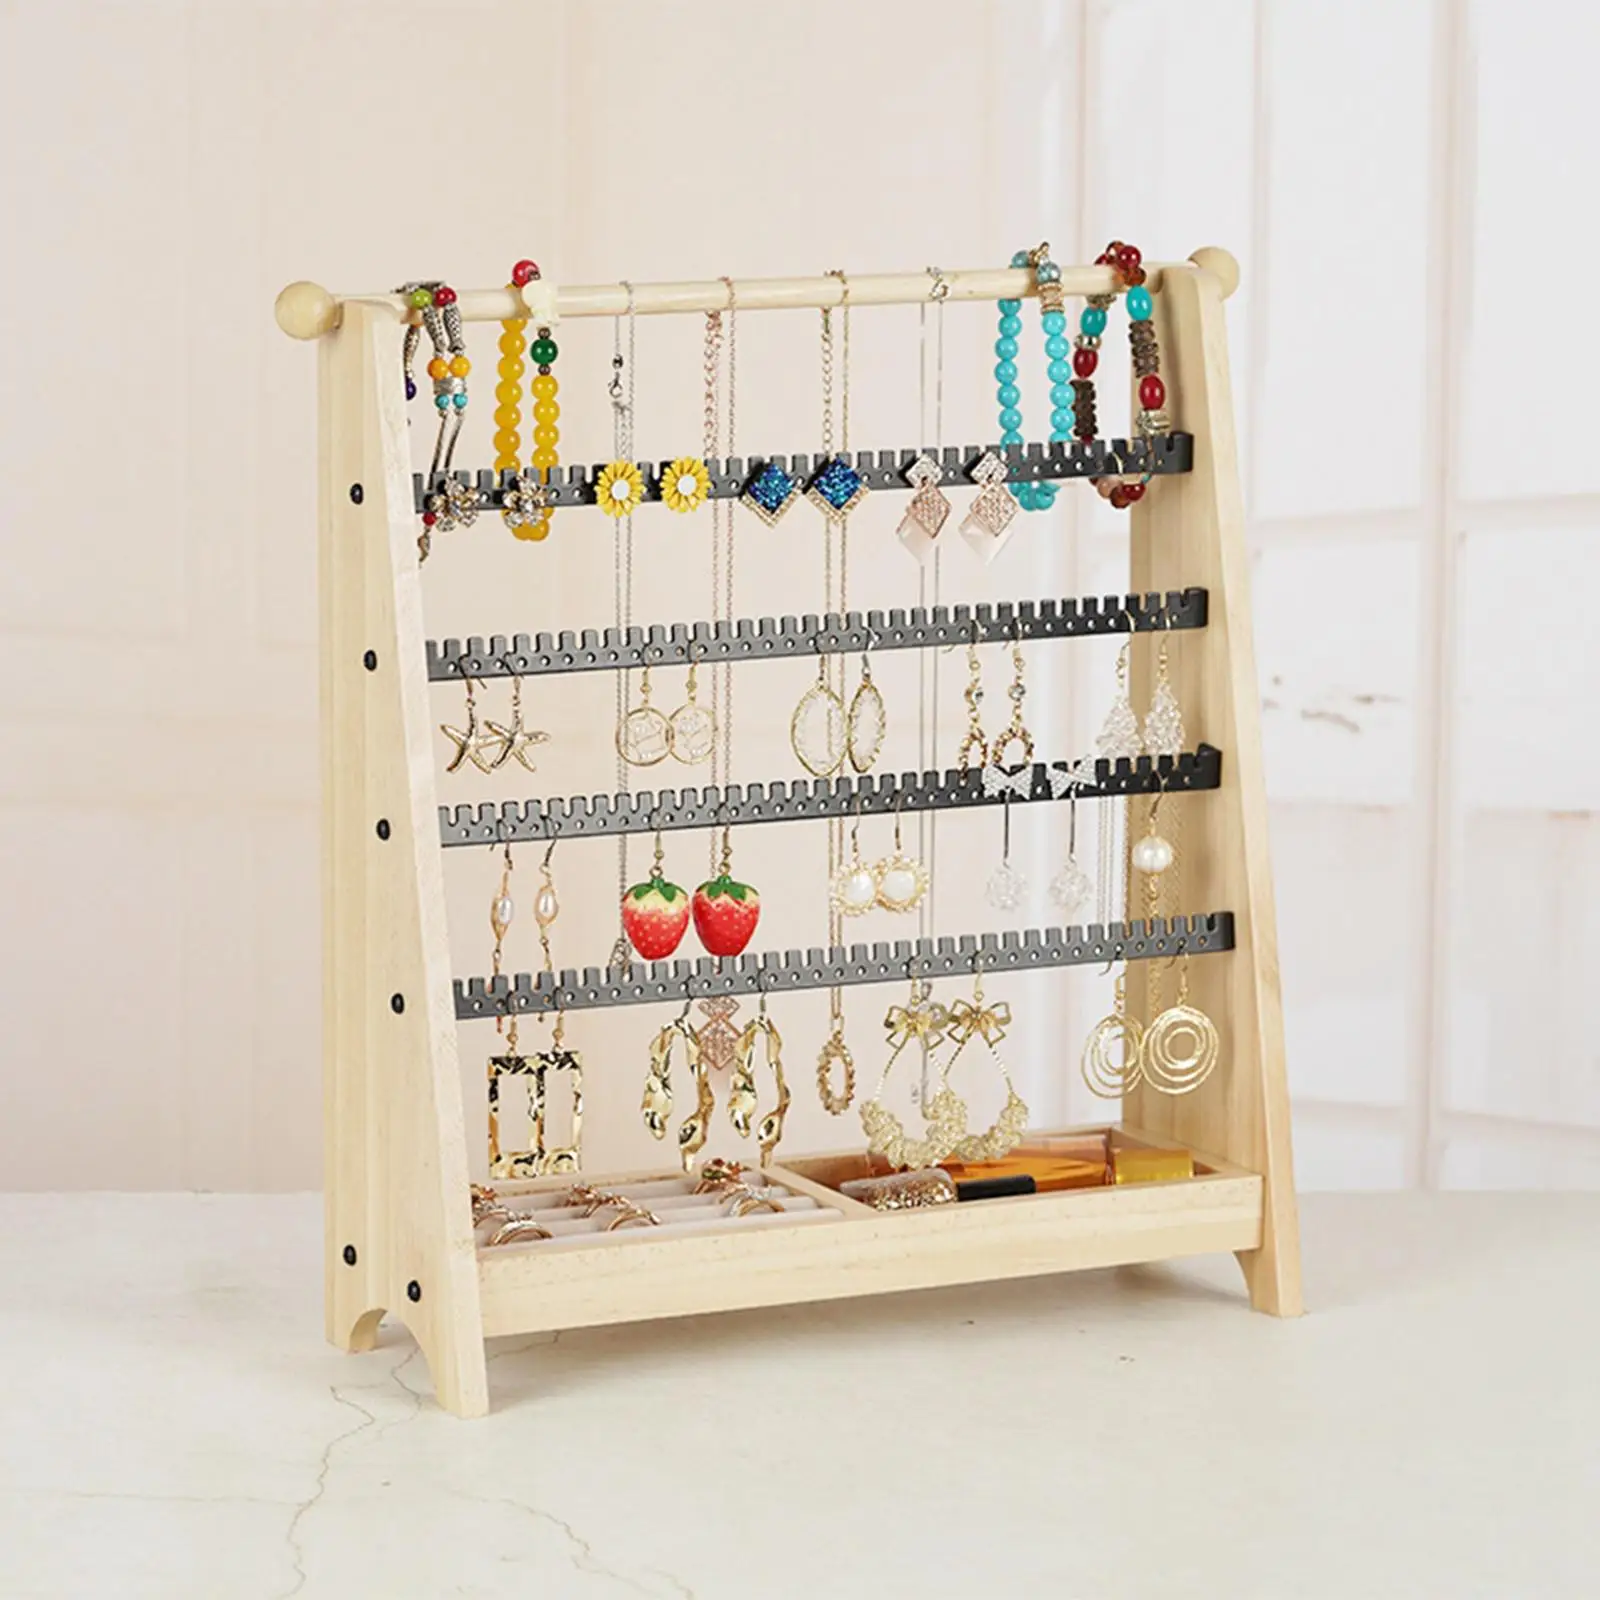 5 Tiers Jewelry Display Stand Display Counter Multifunctional Dresser Earrings Organizer for Rings Necklace Holder Hanging Rack